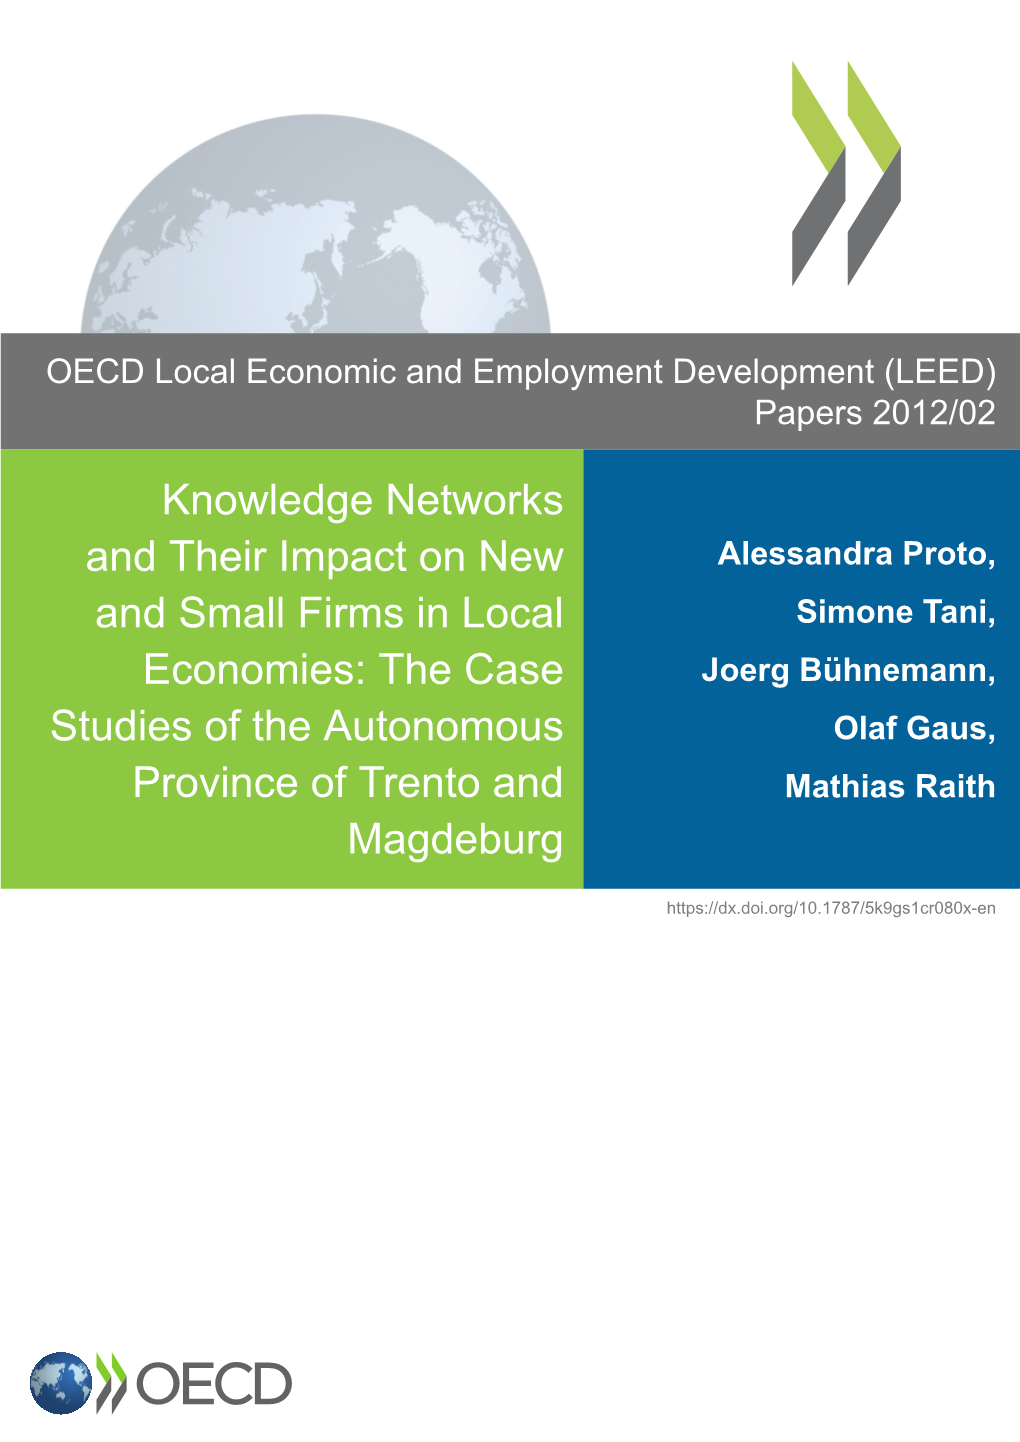 Knowledge Networks and Their Impact on New and Small Firms in Local Economies: the Case Studies of the Autonomous Province of Tr